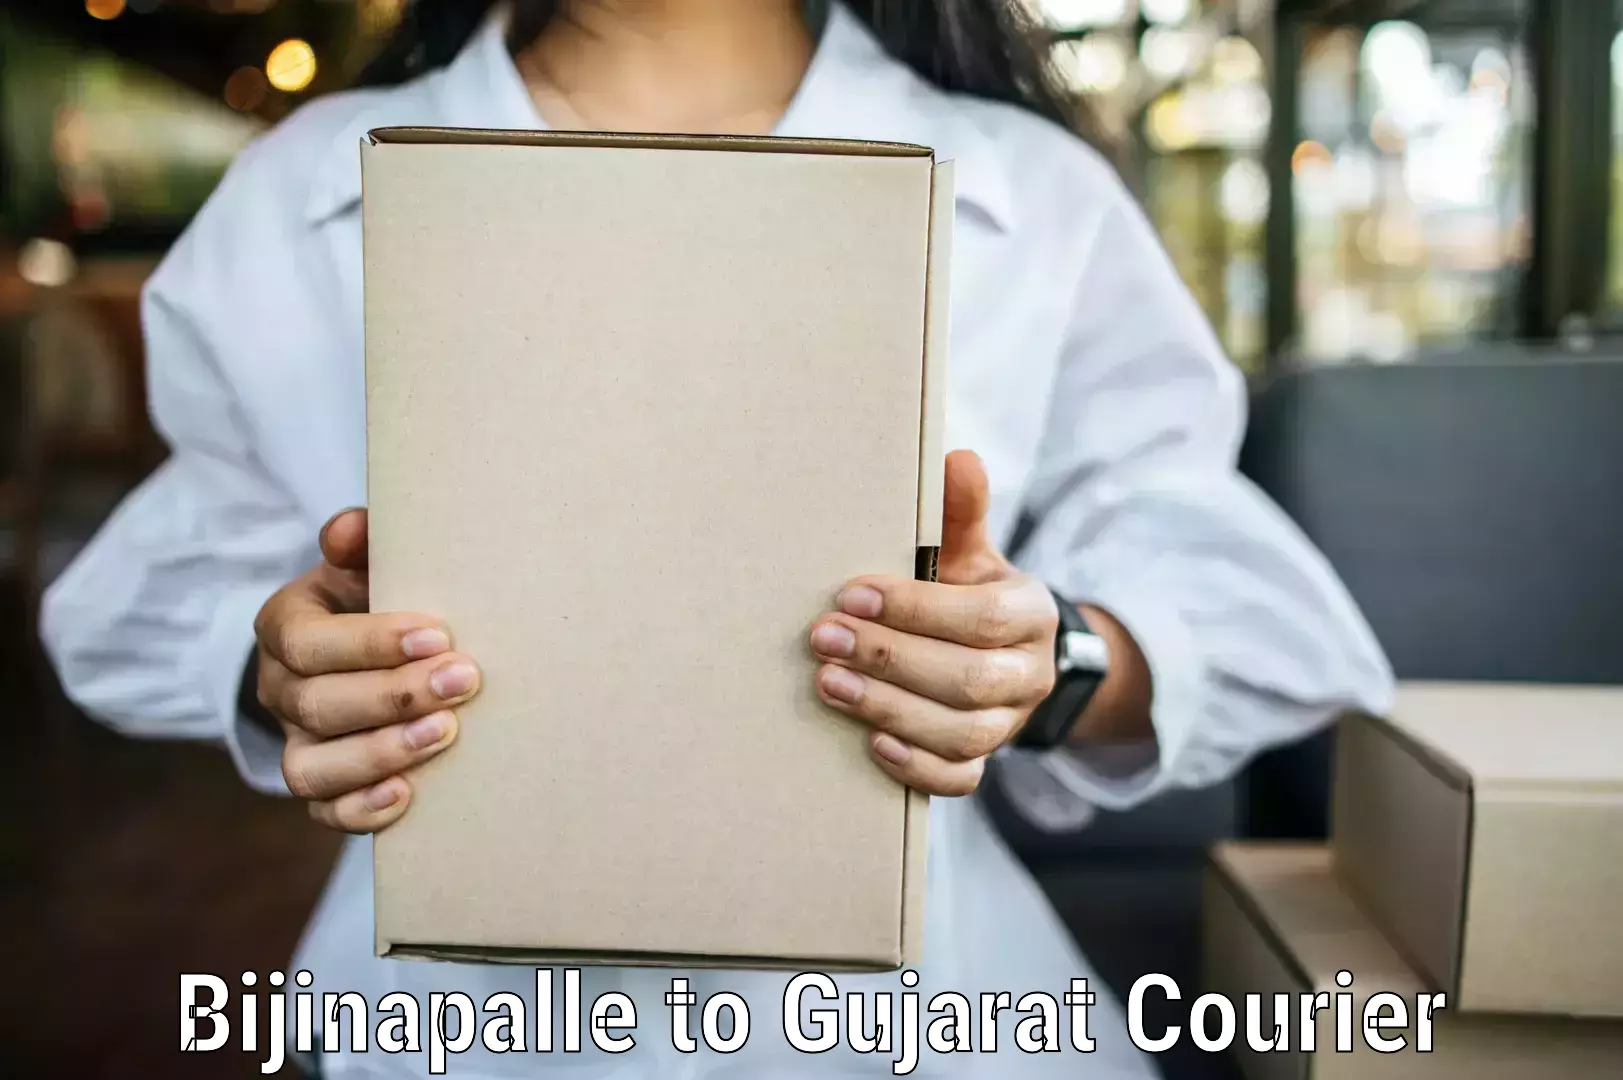 Quality courier partnerships Bijinapalle to Unjha